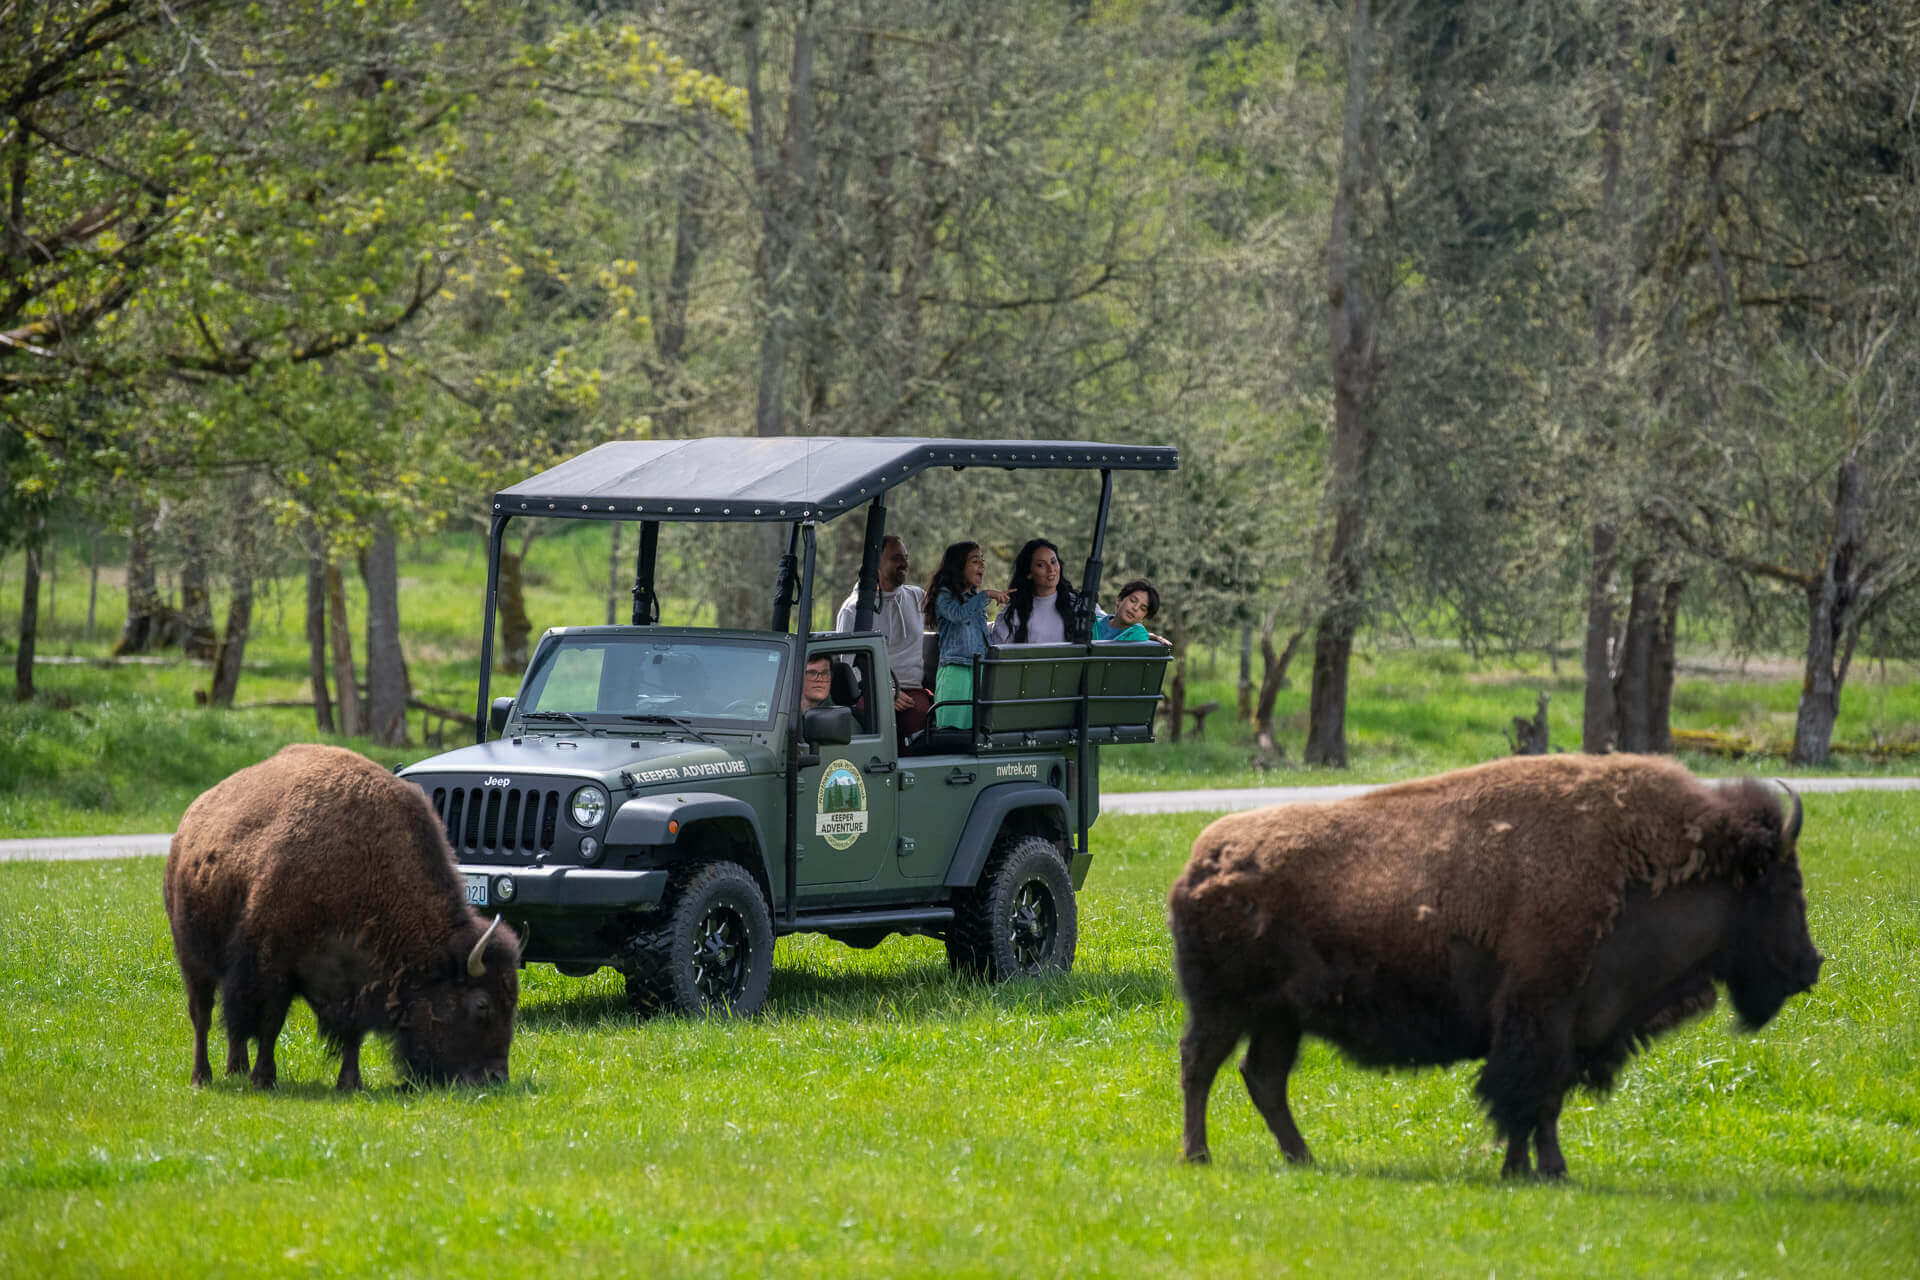 Kids and parents get an up-close look at two bison while riding in the back of an open-air vehicle during a tour at Northwest Trek